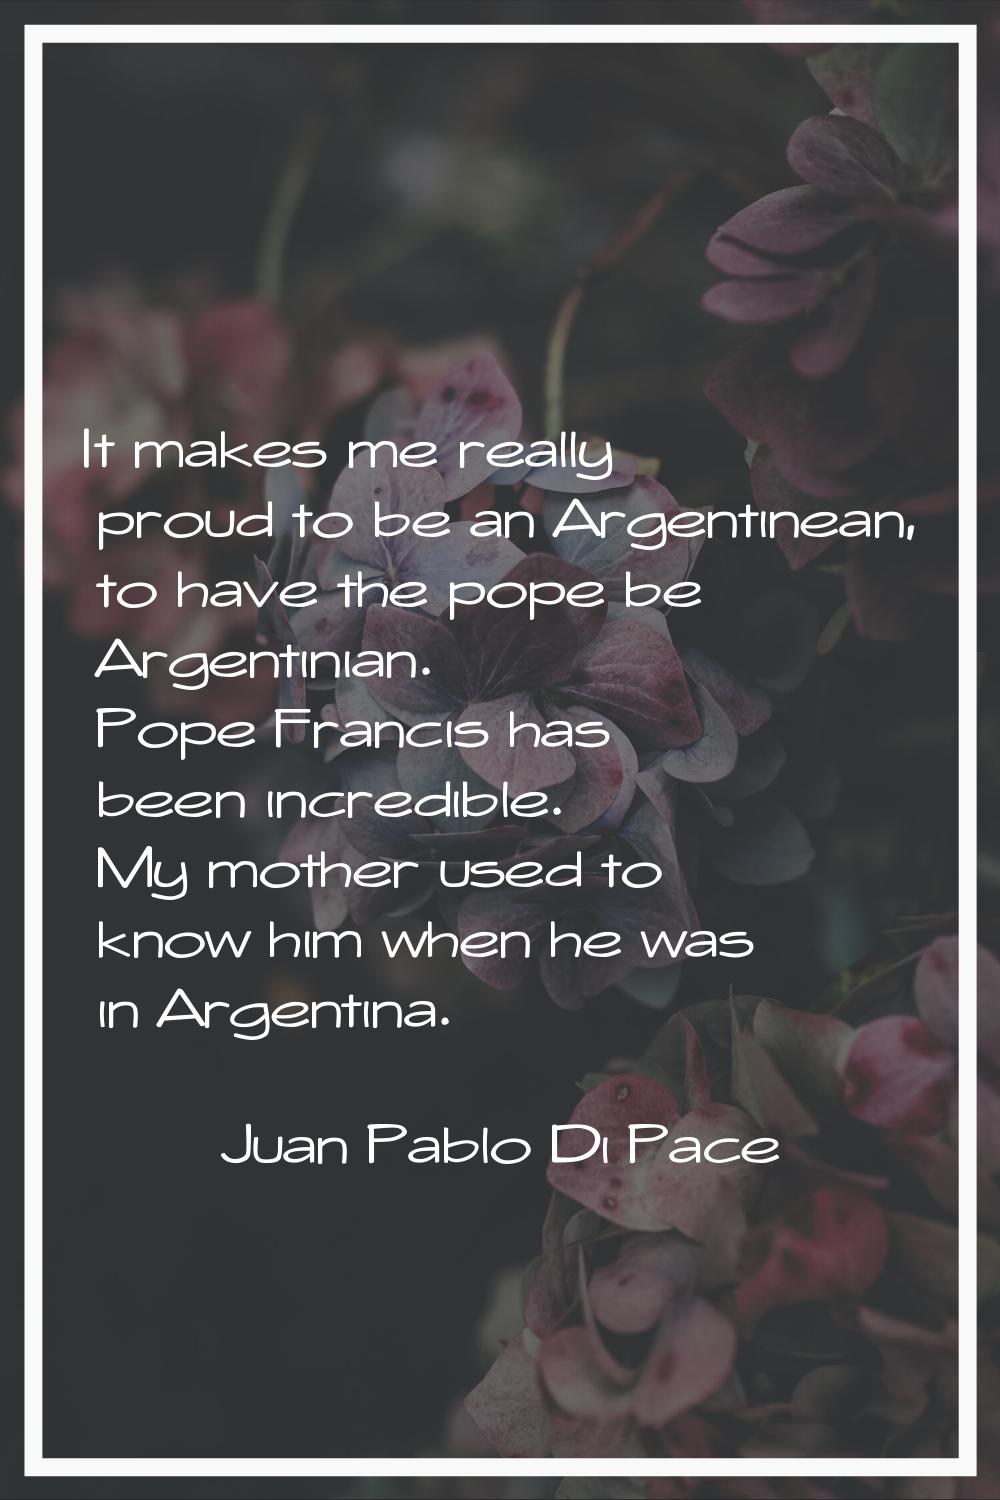 It makes me really proud to be an Argentinean, to have the pope be Argentinian. Pope Francis has be